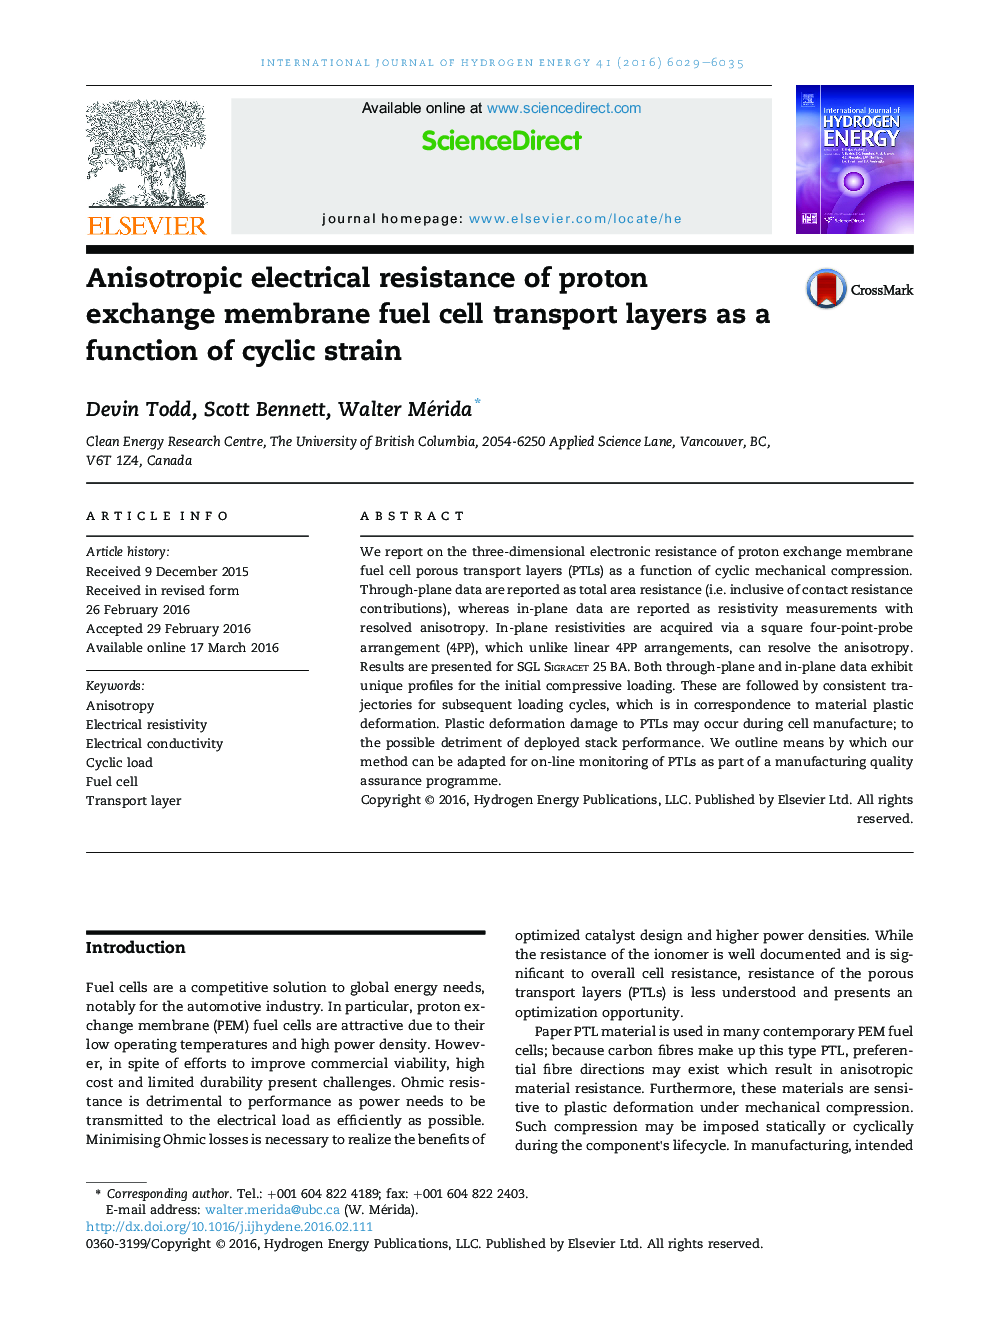 Anisotropic electrical resistance of proton exchange membrane fuel cell transport layers as a function of cyclic strain